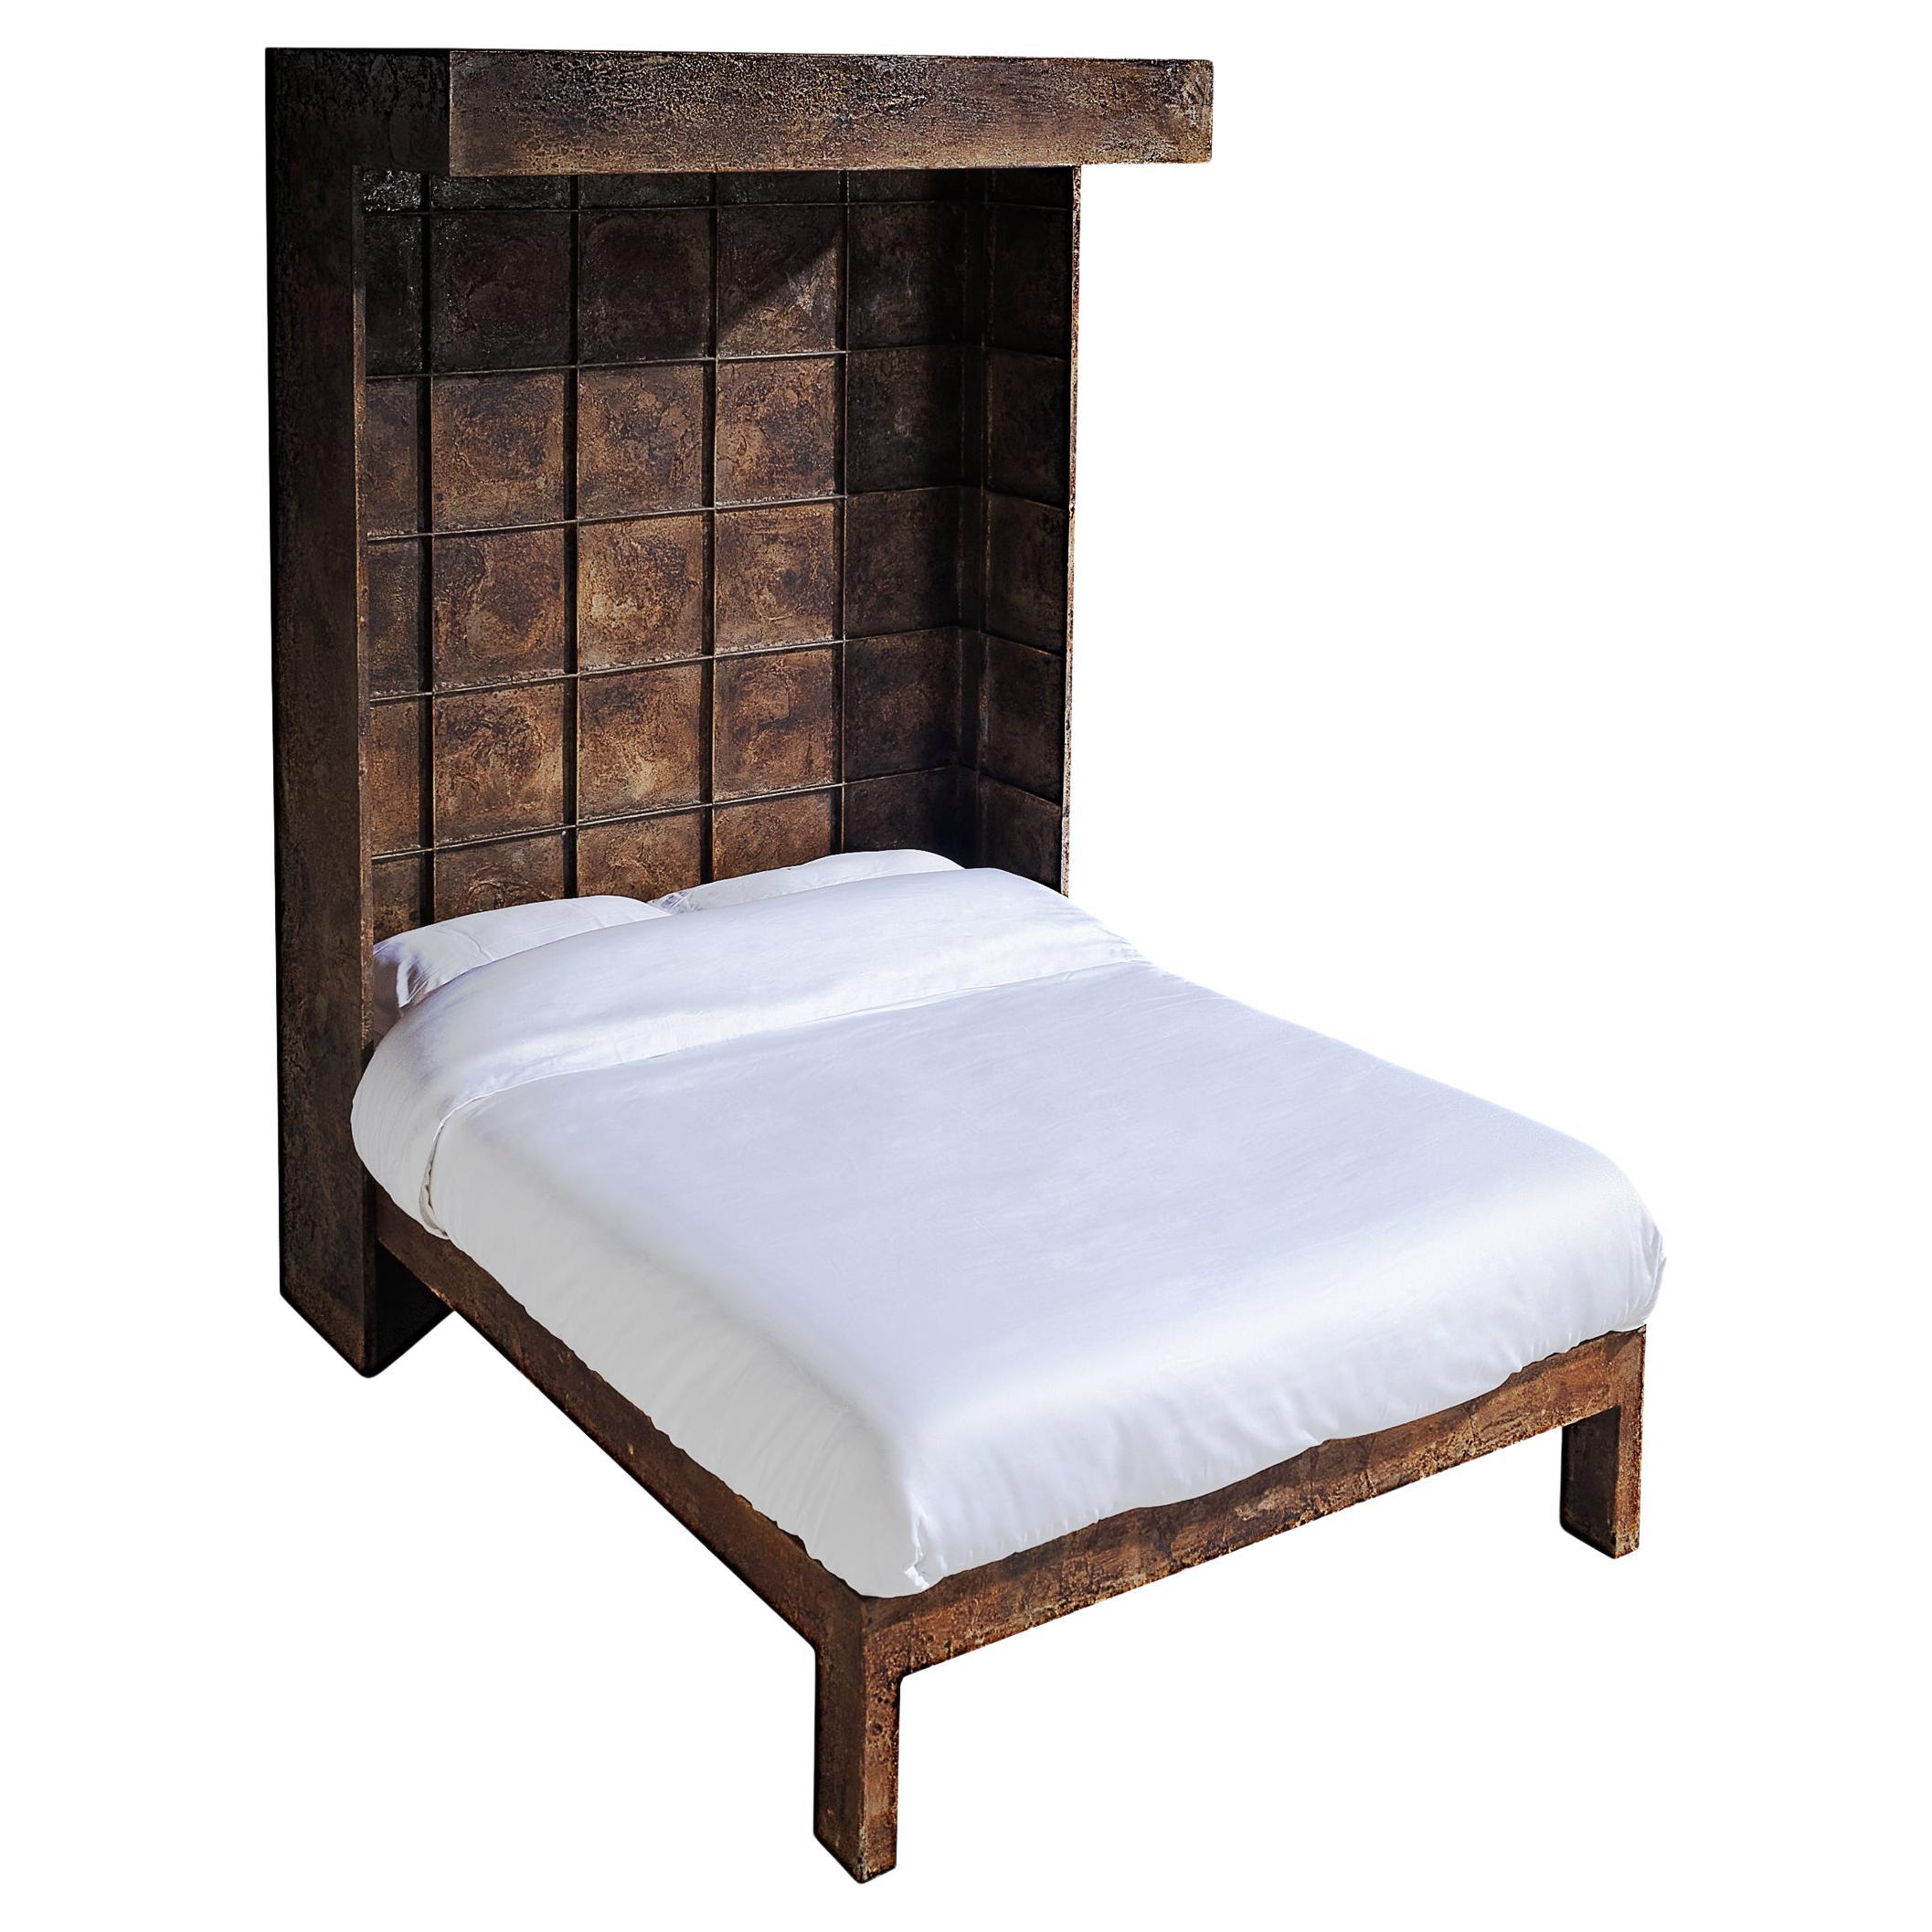 Pia Manu Unique Handcrafted Double Bed in Wrought Iron 